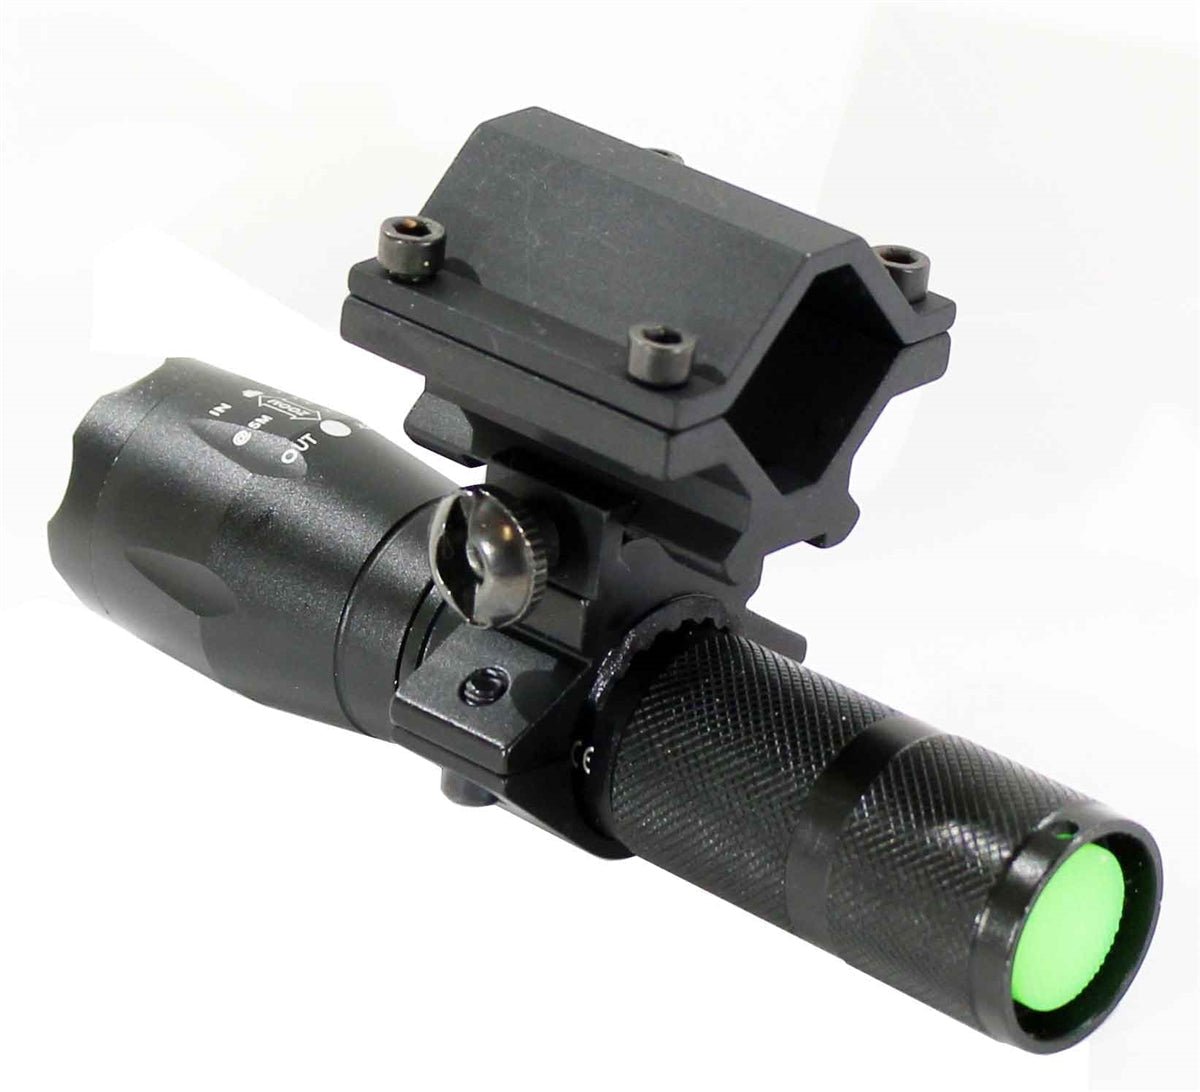 Tactical 1200 Lumen Flashlight With Mount Compatible With Mossberg 590 12 Gauge. - TRINITY SUPPLY INC